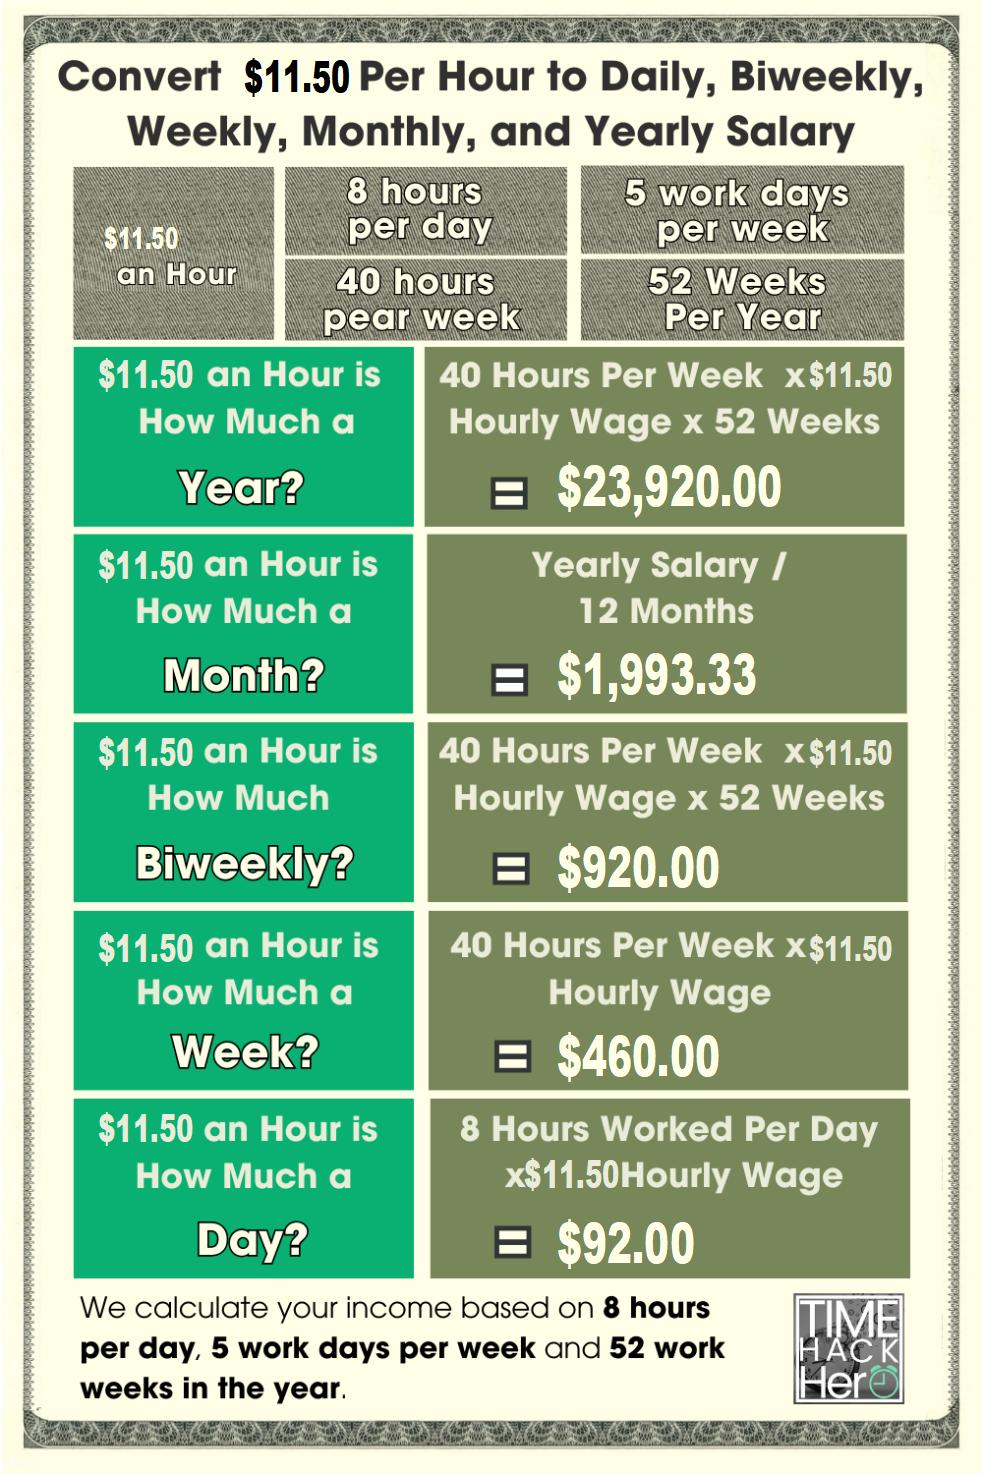 Convert $11.50 Per Hour to Weekly, Monthly, and Yearly Salary